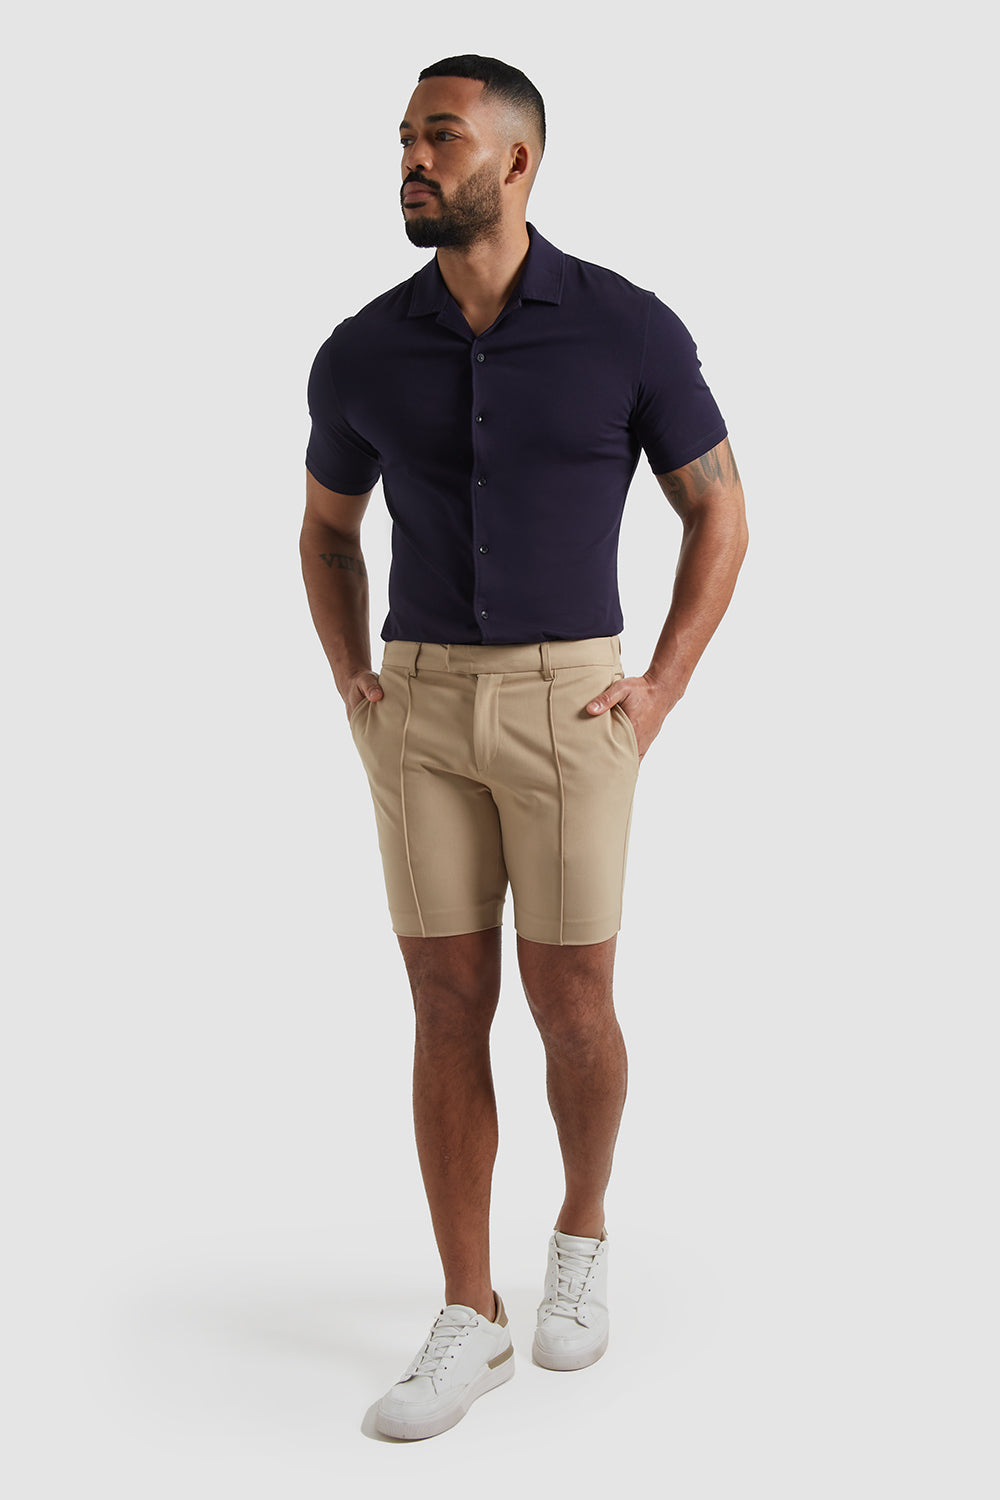 Tailored Shorts In Sand - TAILORED ATHLETE - ROW